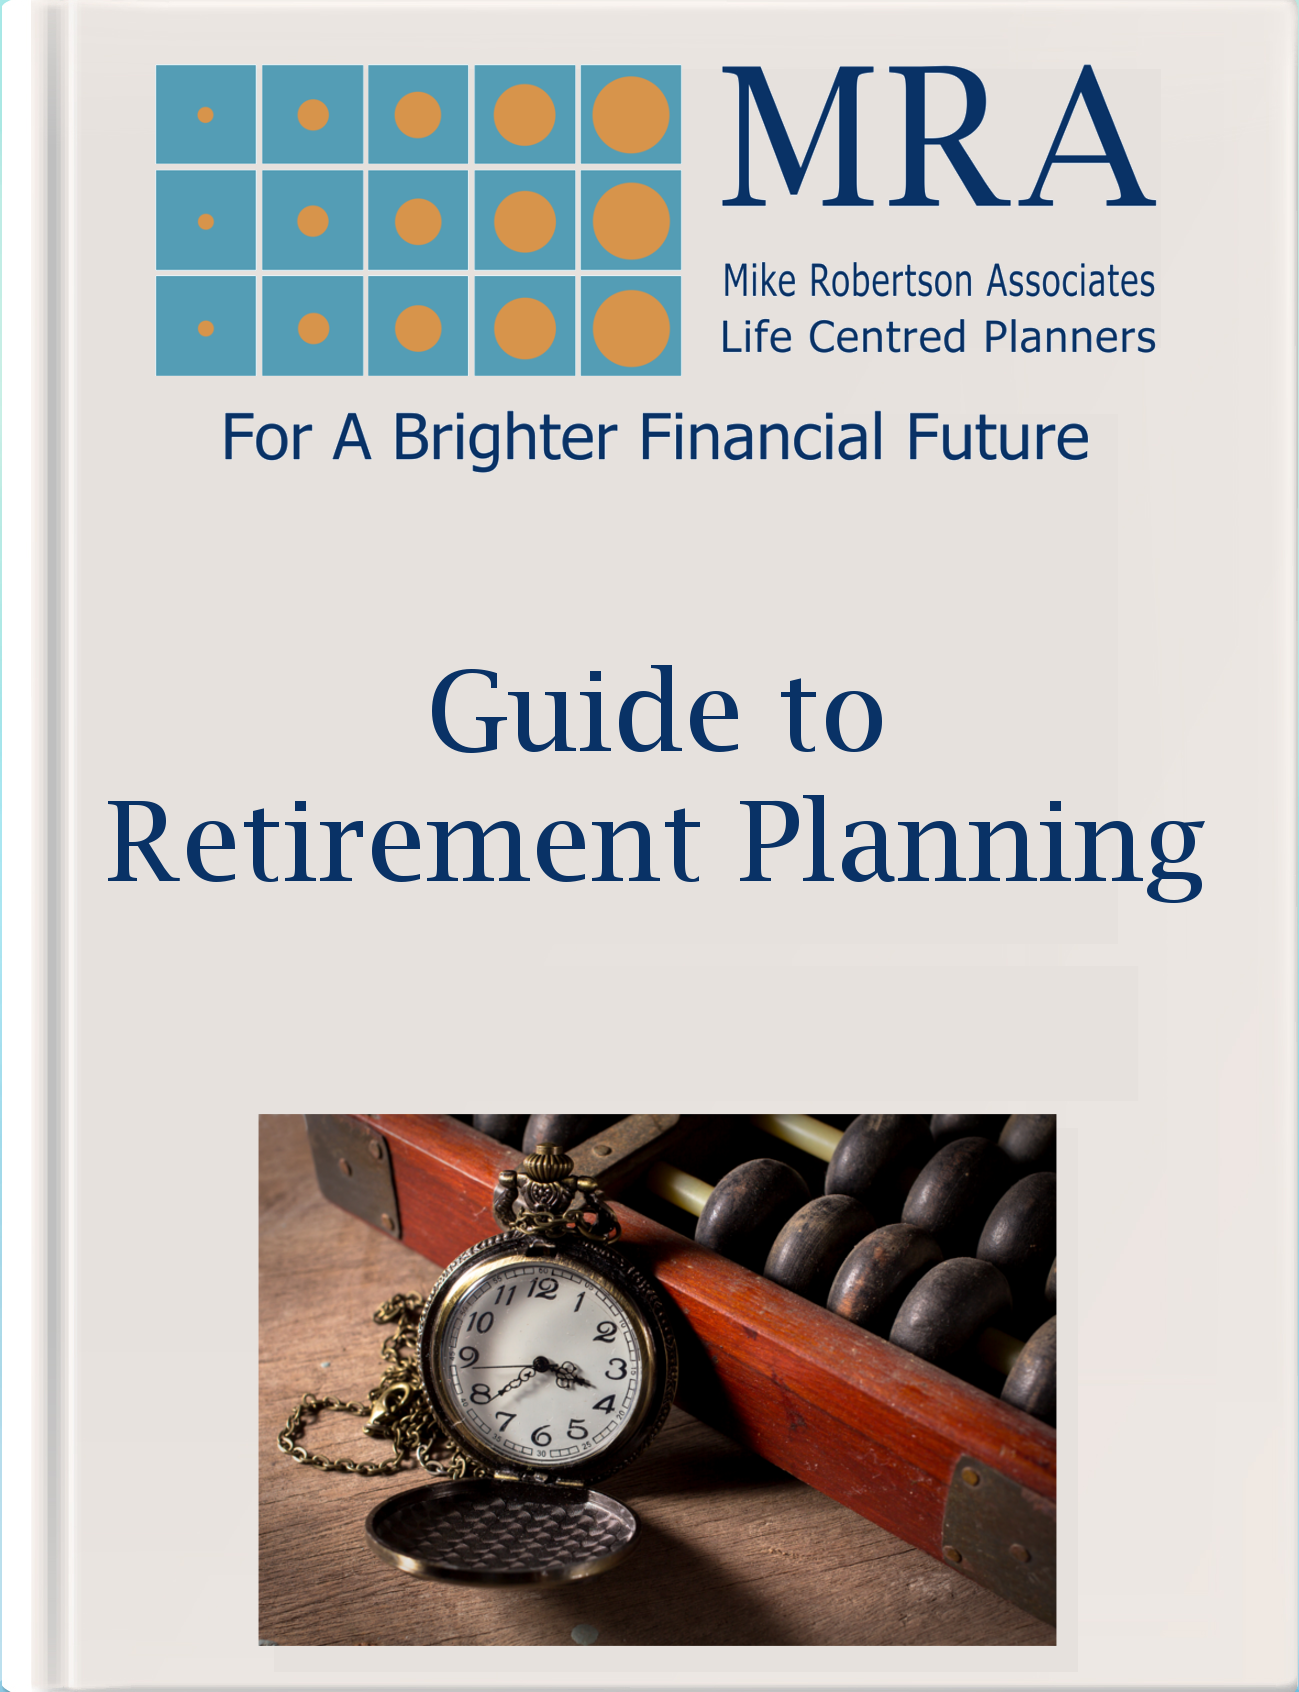 Download our Guide to Retirement Planning